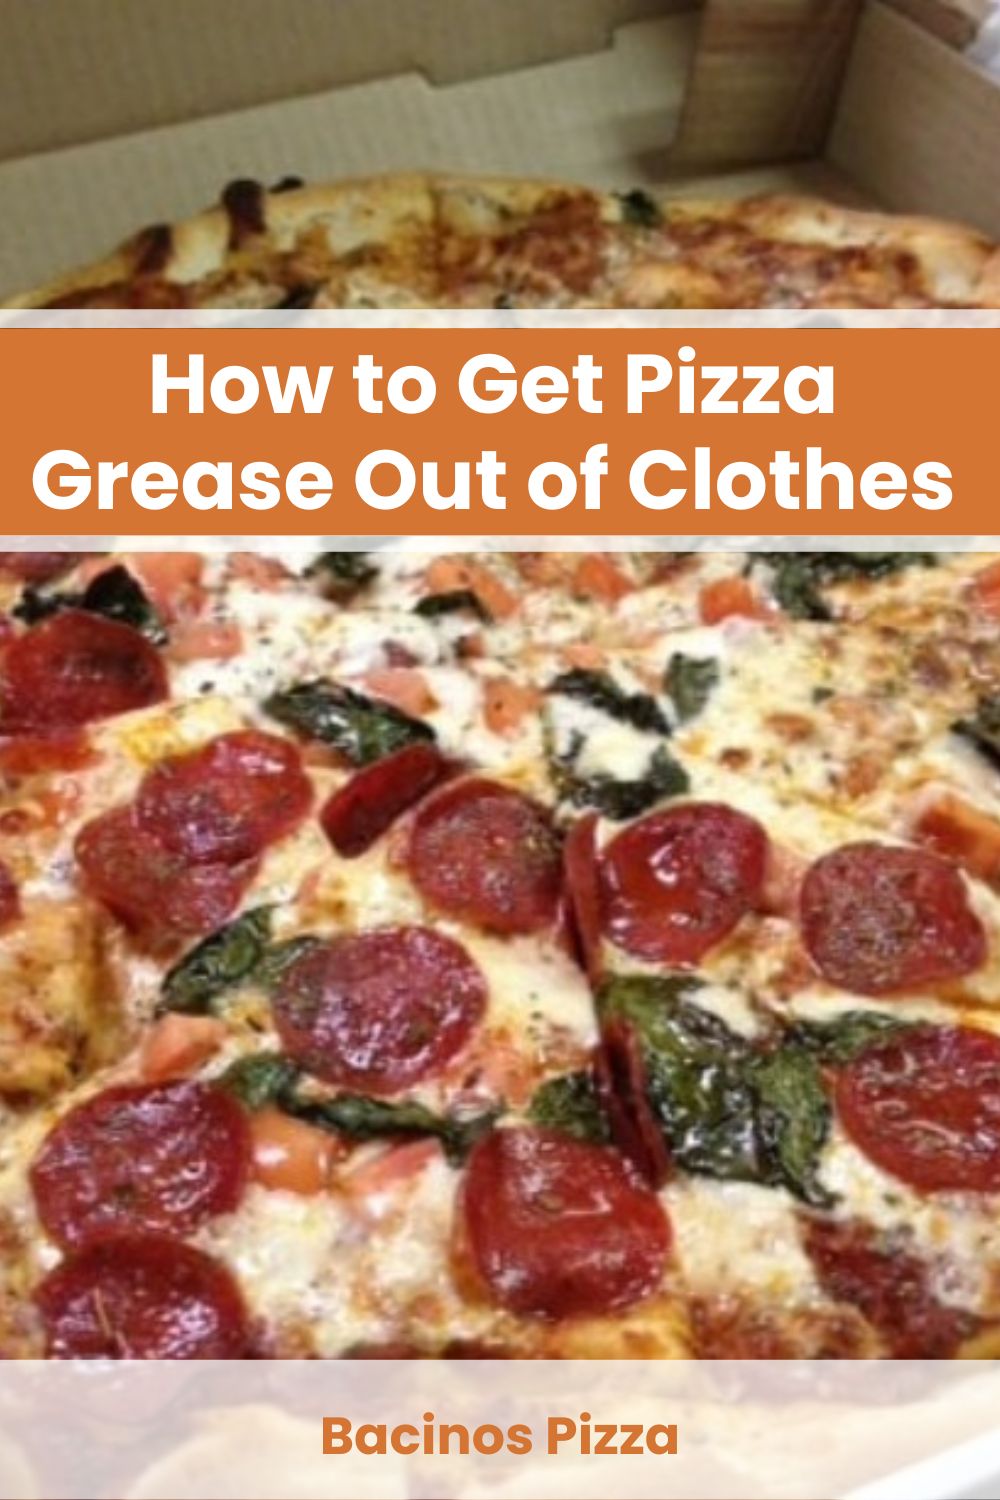 Get Pizza Grease Out of Clothes